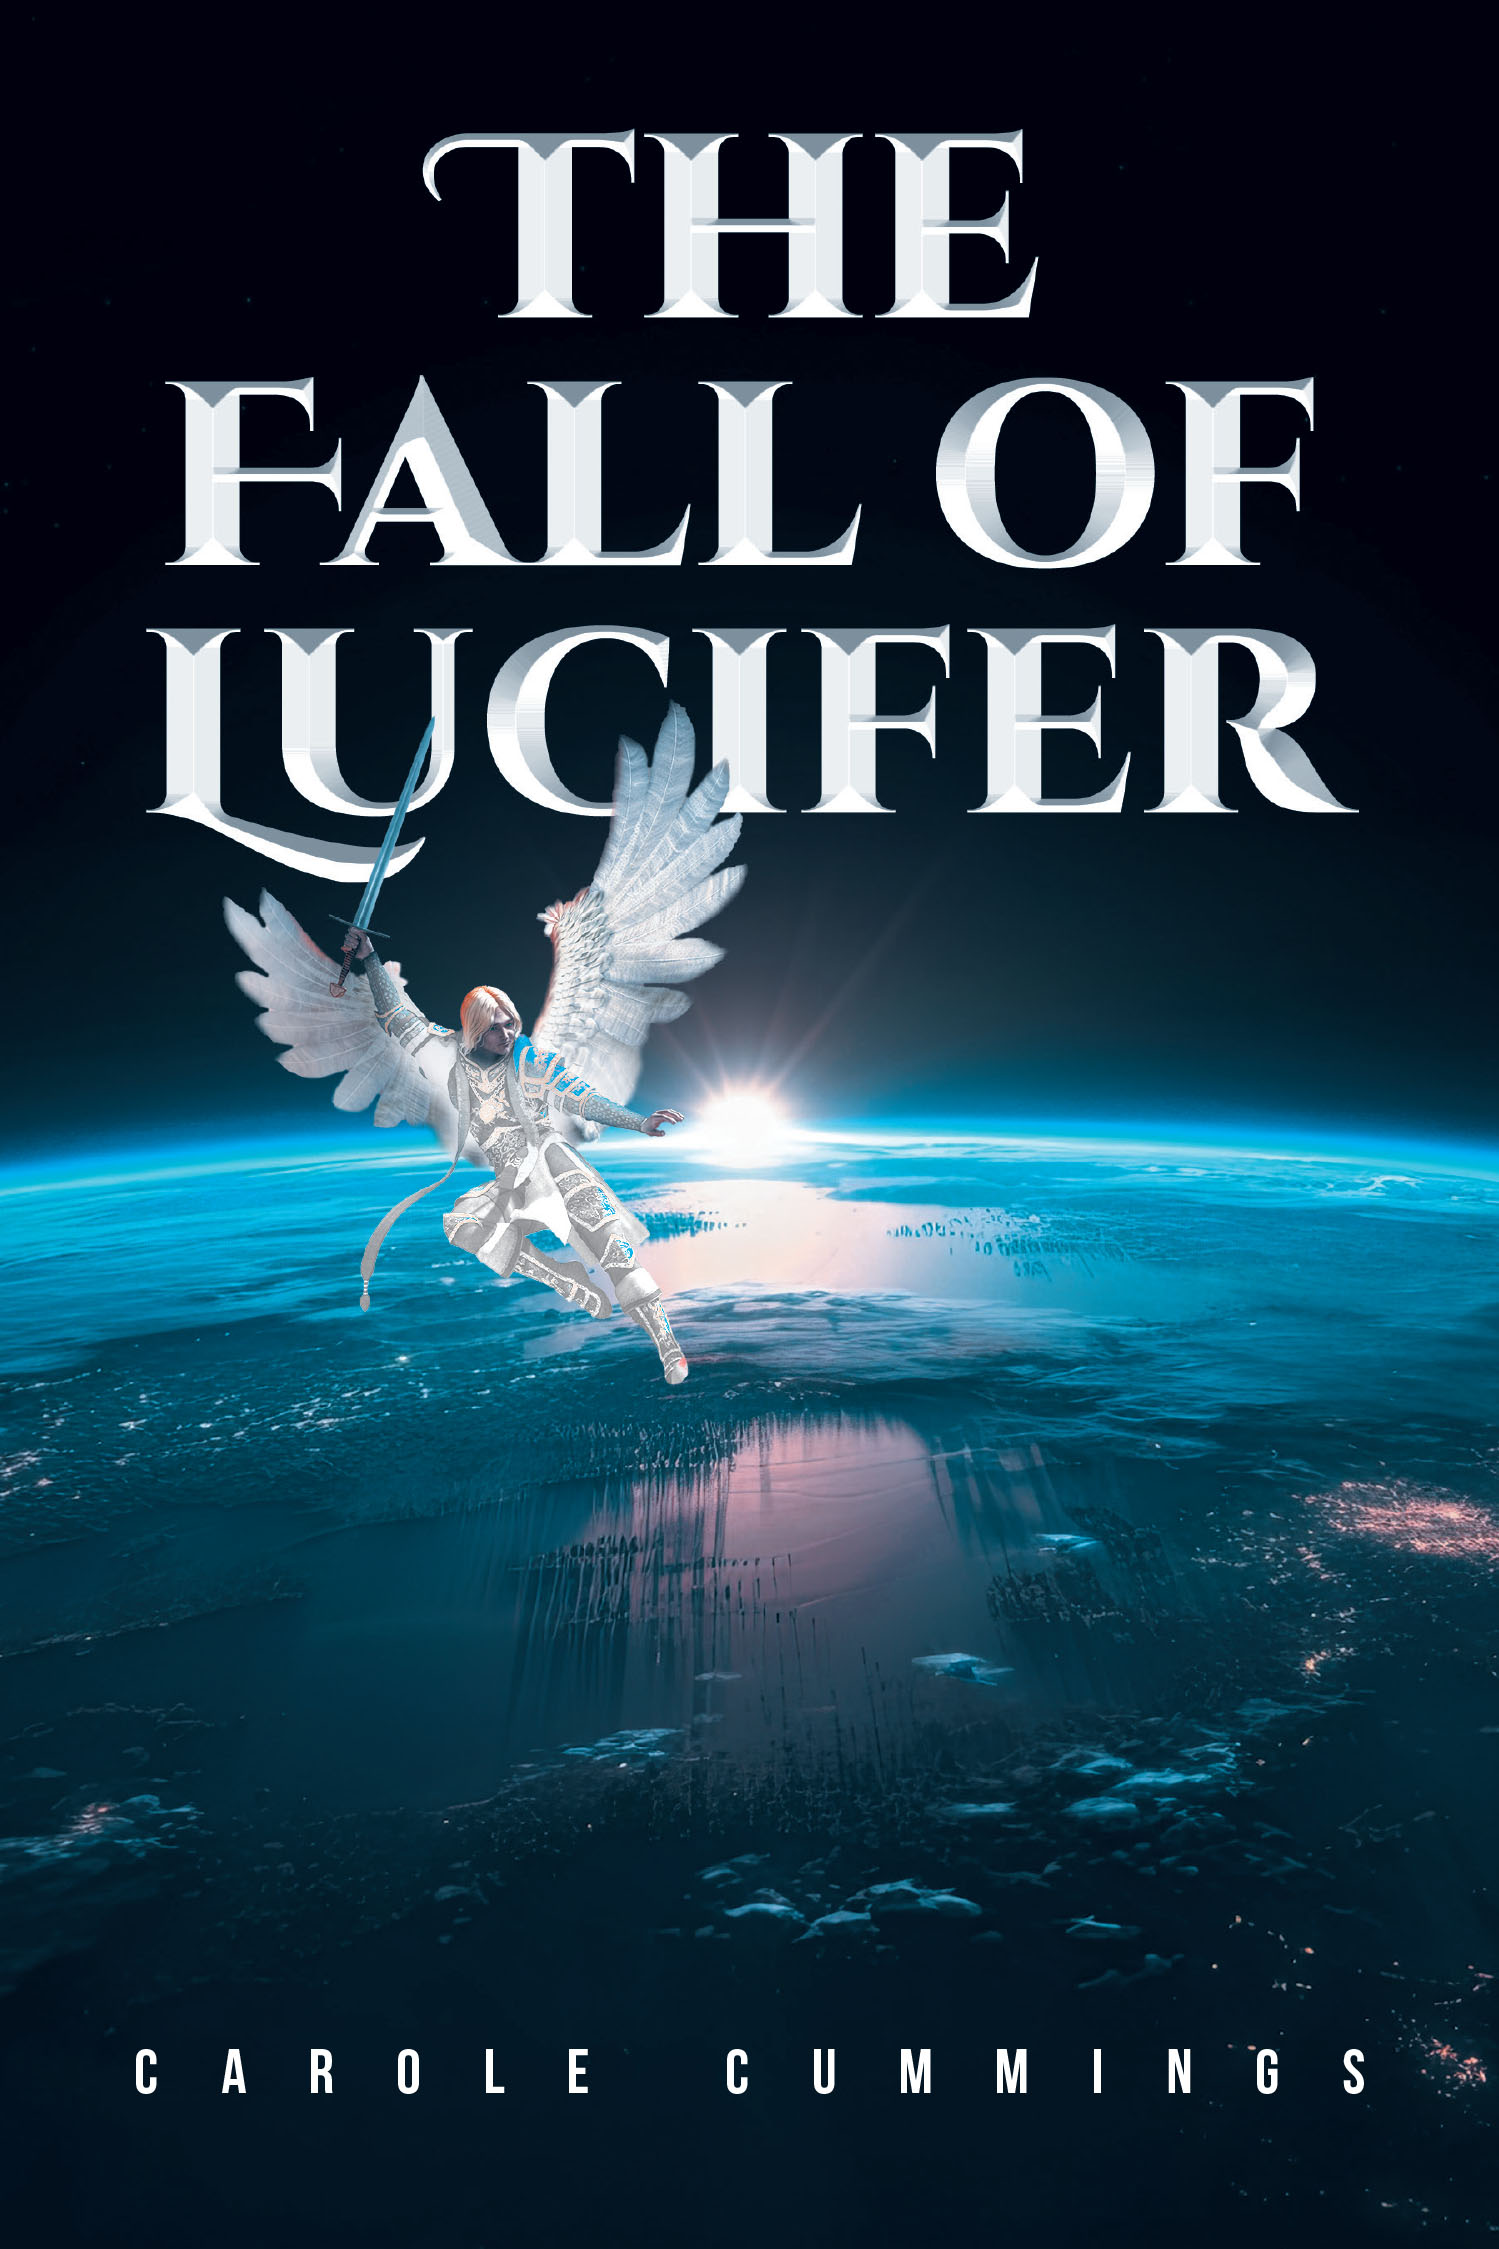 Carole Cummings’s Newly Released "The Fall of Lucifer" is a Riveting and Insightful Examination of Scripture